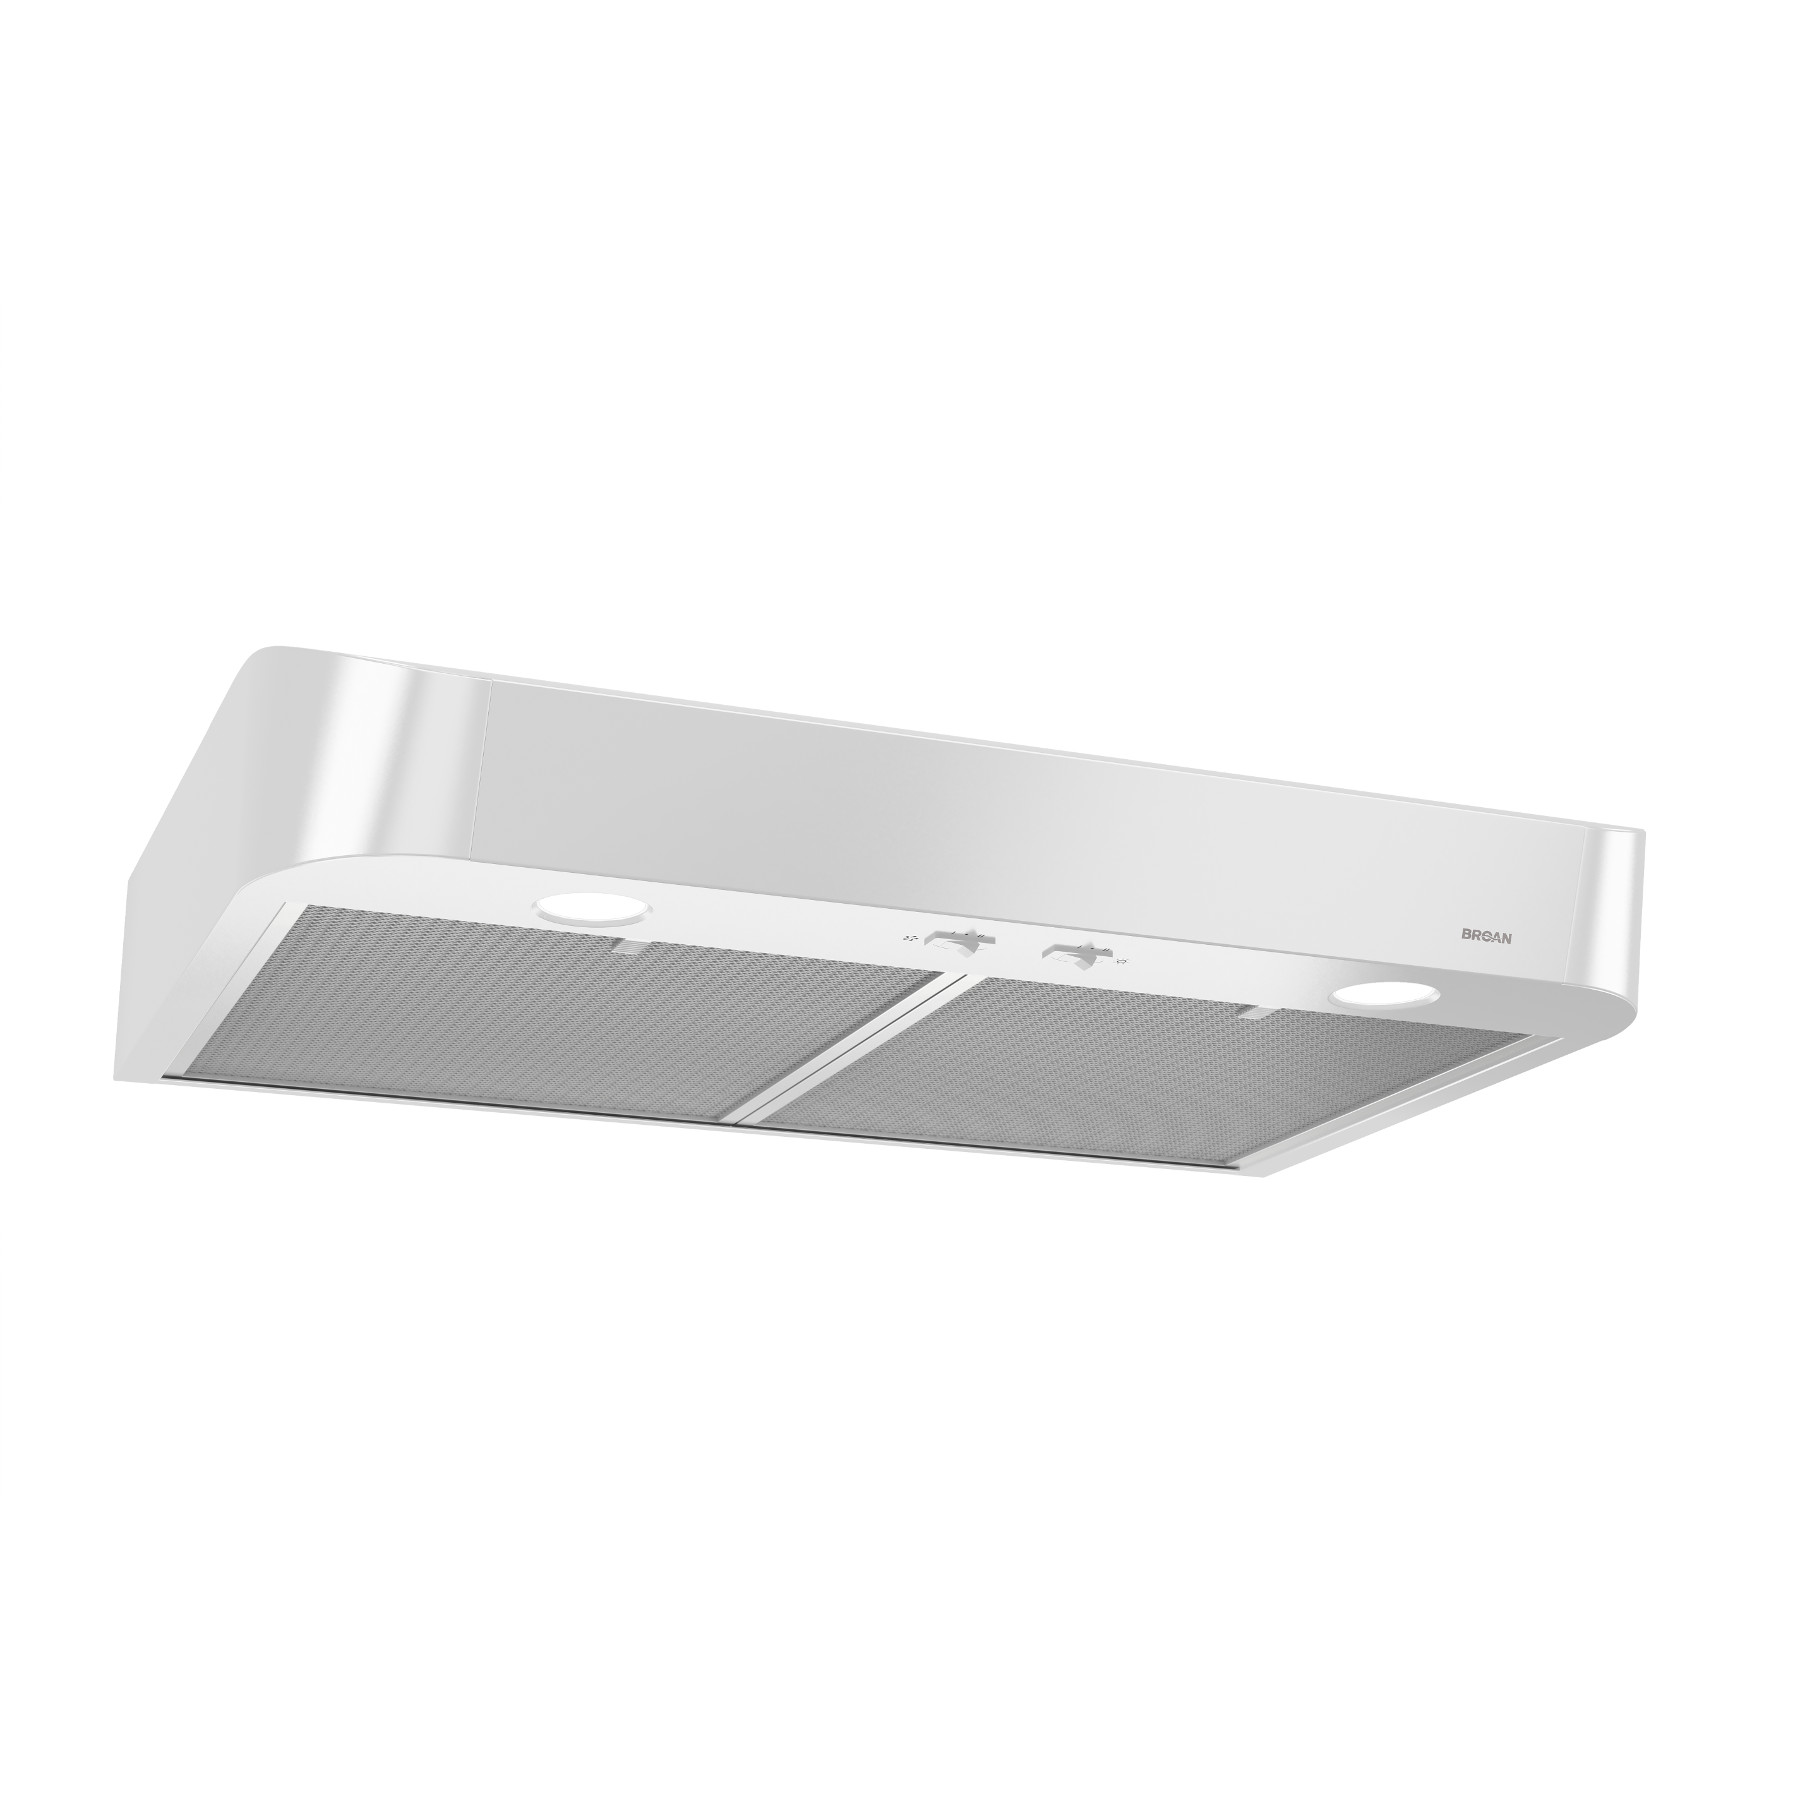 **DISCONTINUED** Broan® 30-Inch Convertible Under-Cabinet Range Hood, White